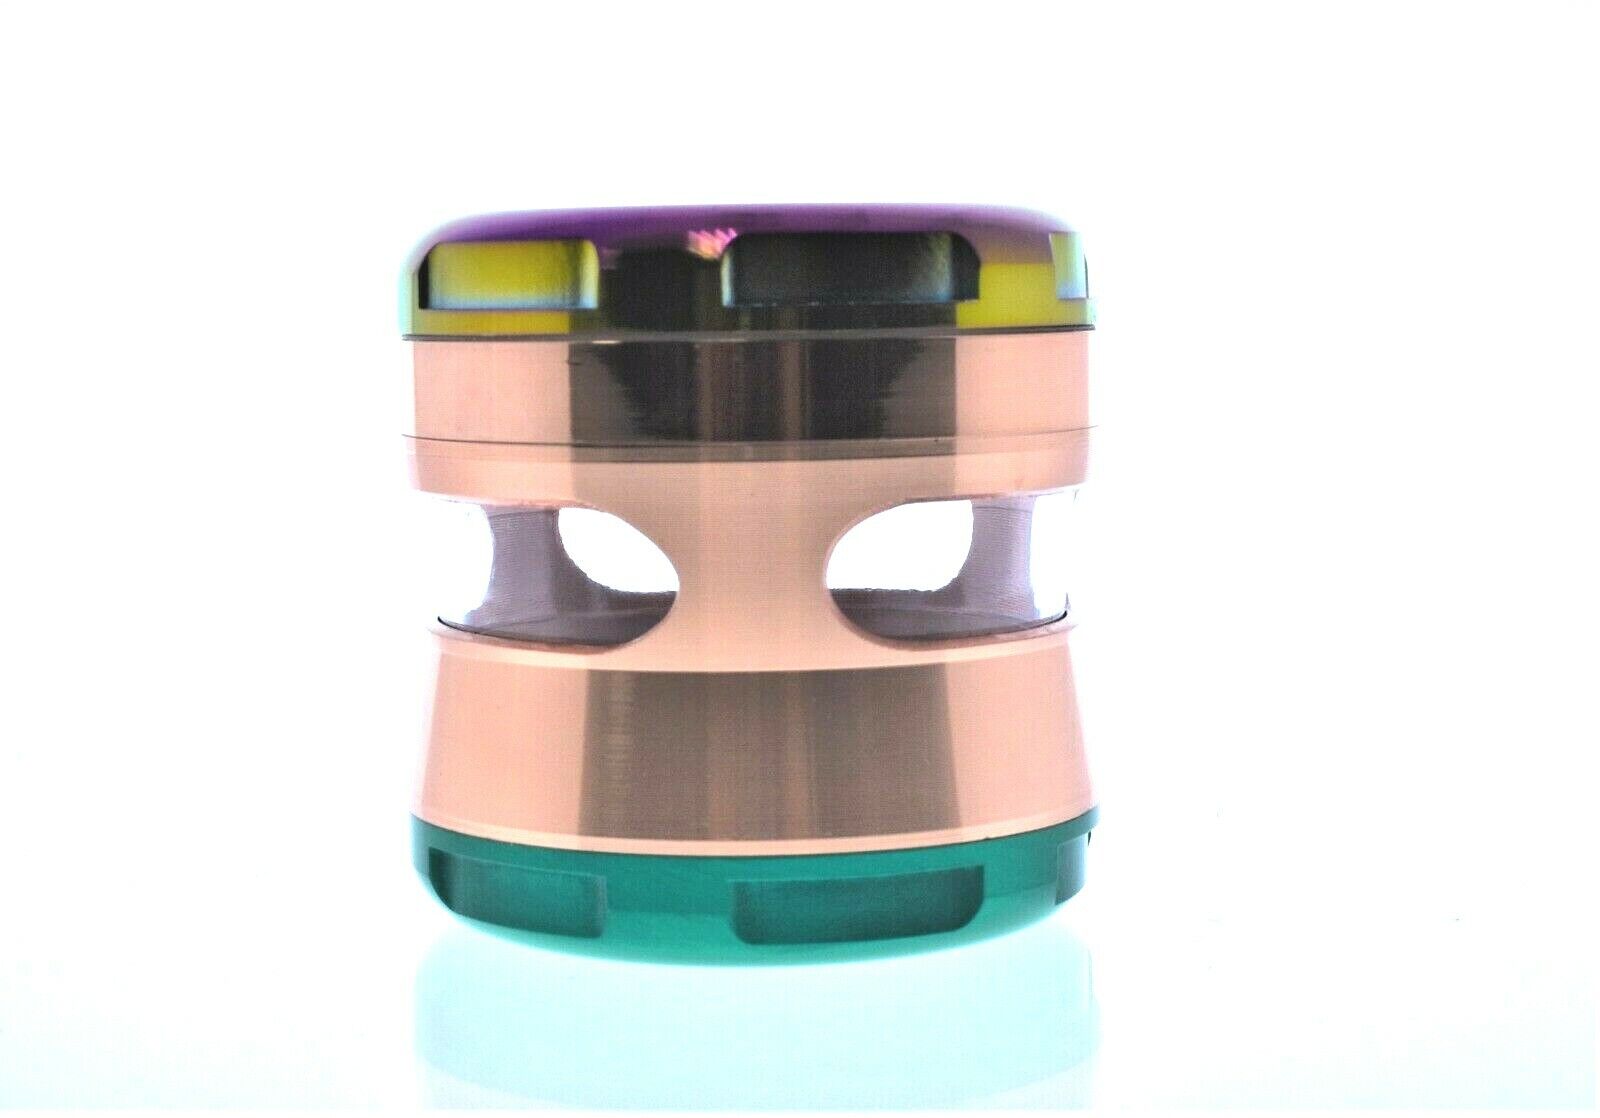  63MM Rainbow Lid With Rose gold body & Green Bottom 186gm -4 Piece